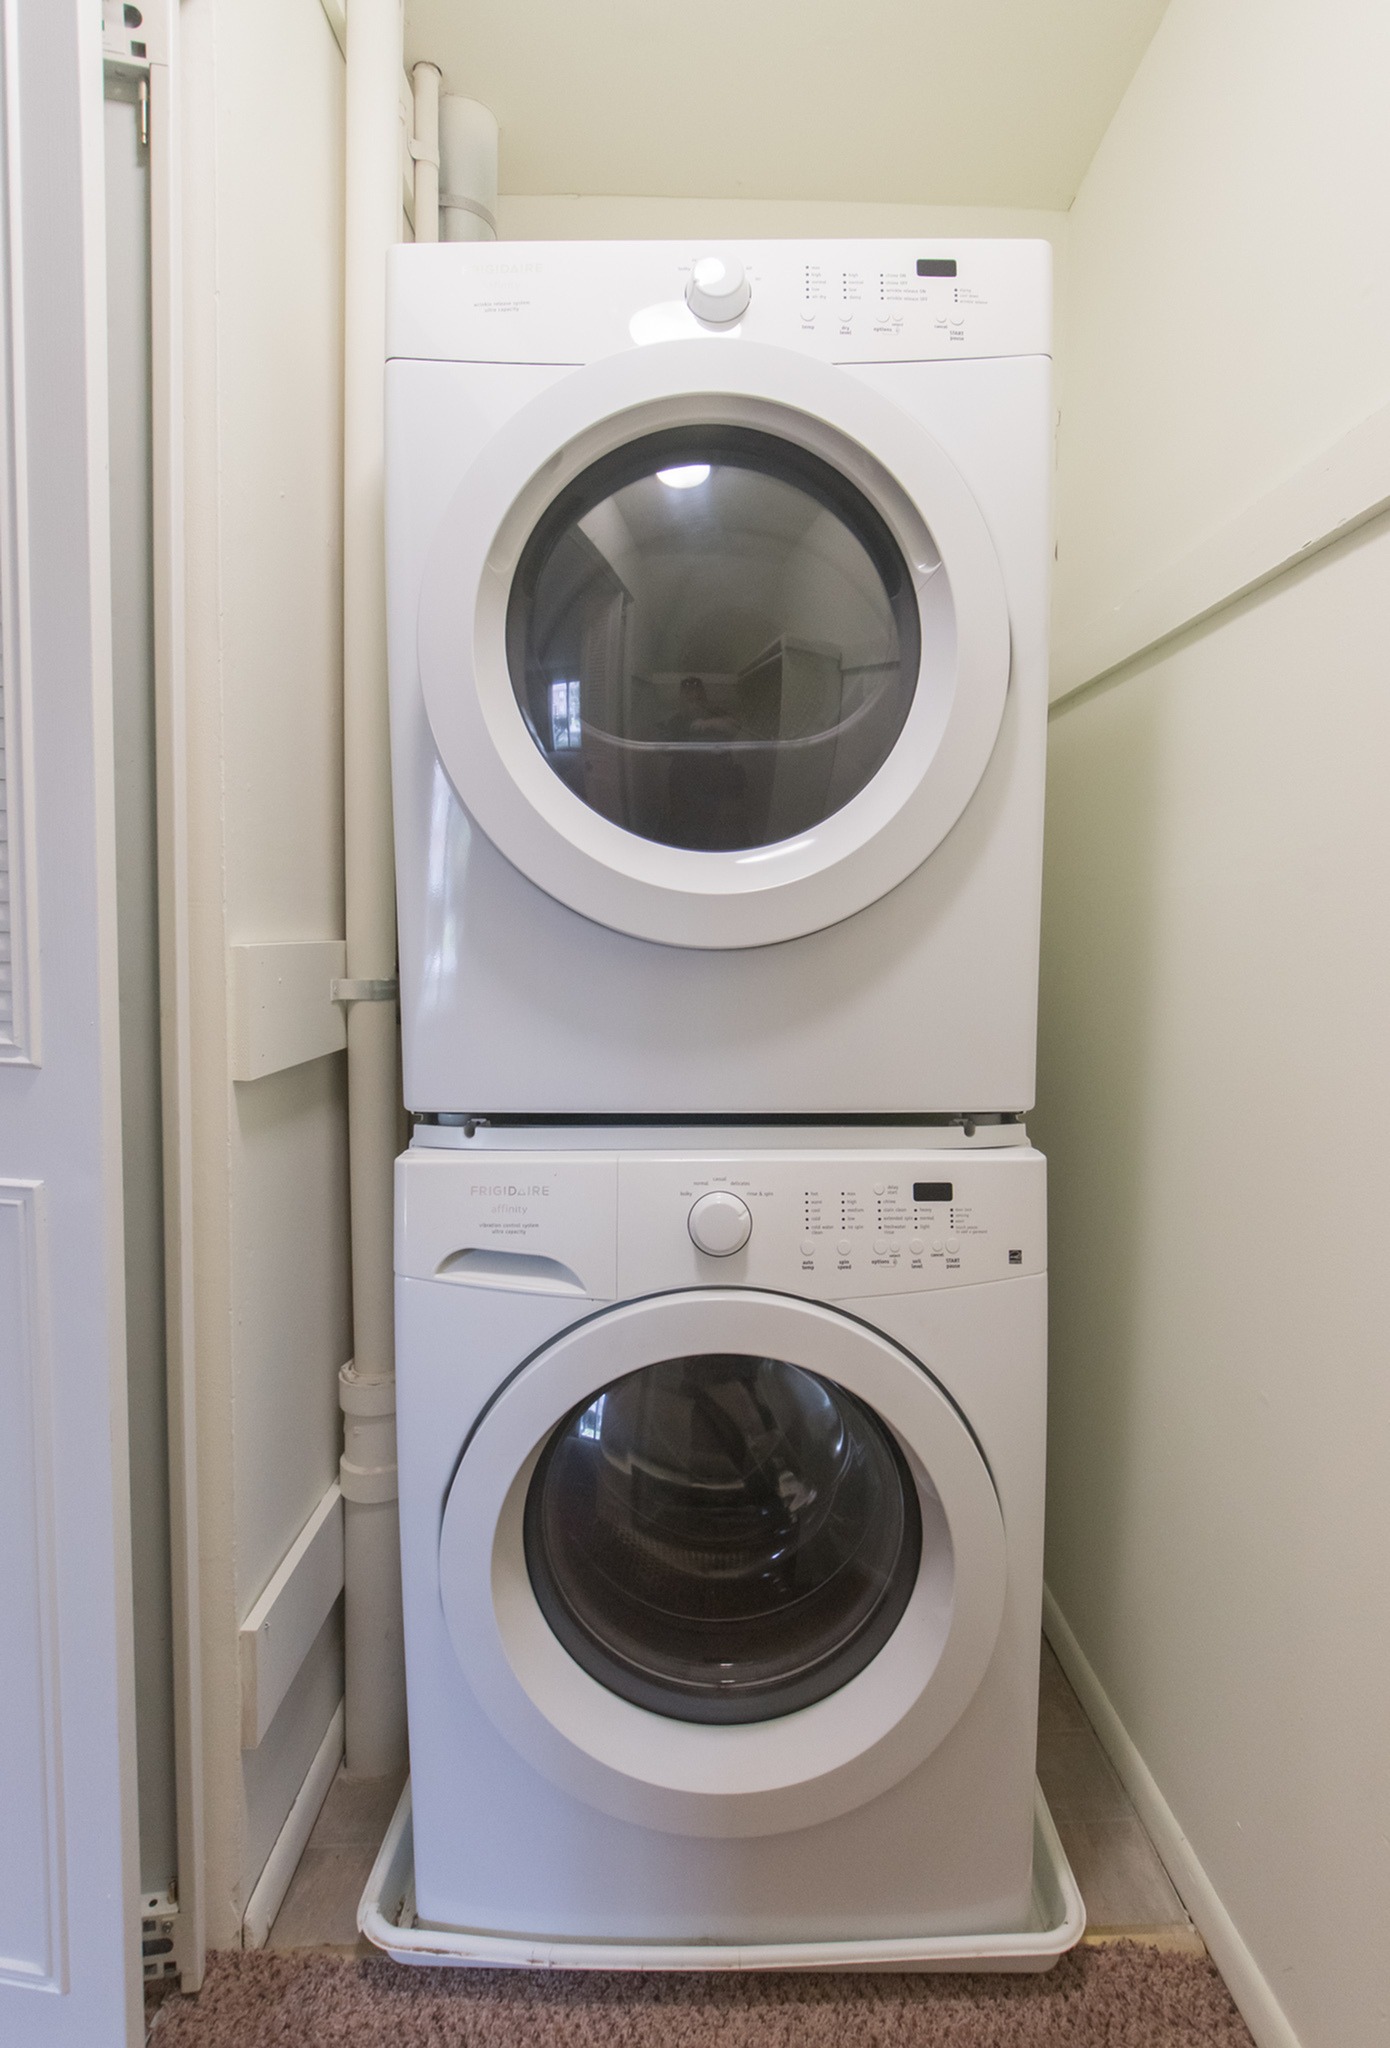 Stackable washer and dryer in an apartment at Independence Crossing.